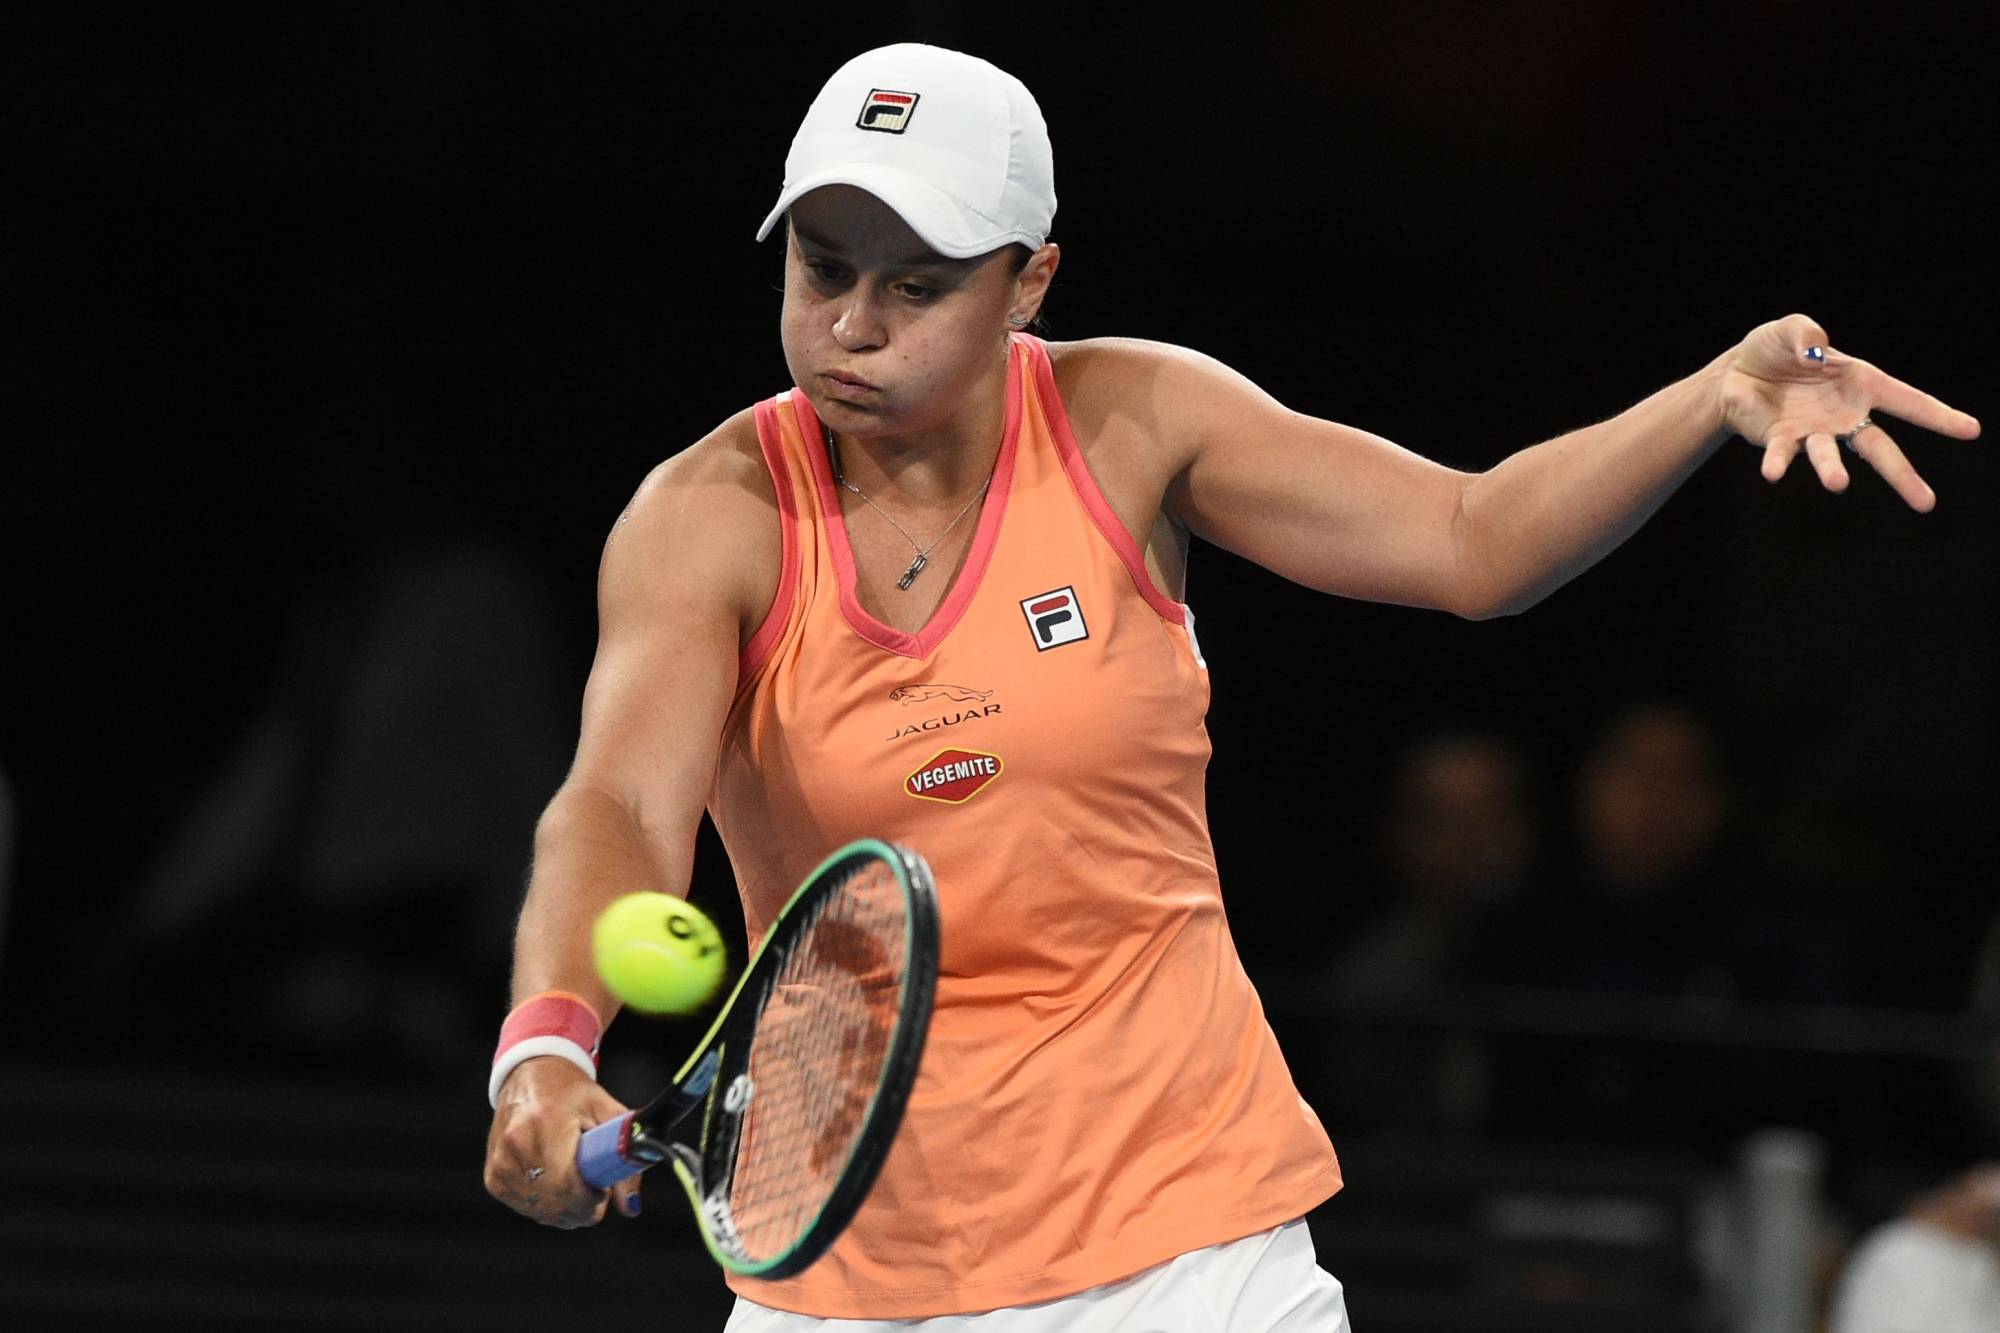 Australian Tennis Player Ash Barty Is Currently Ranked Number One